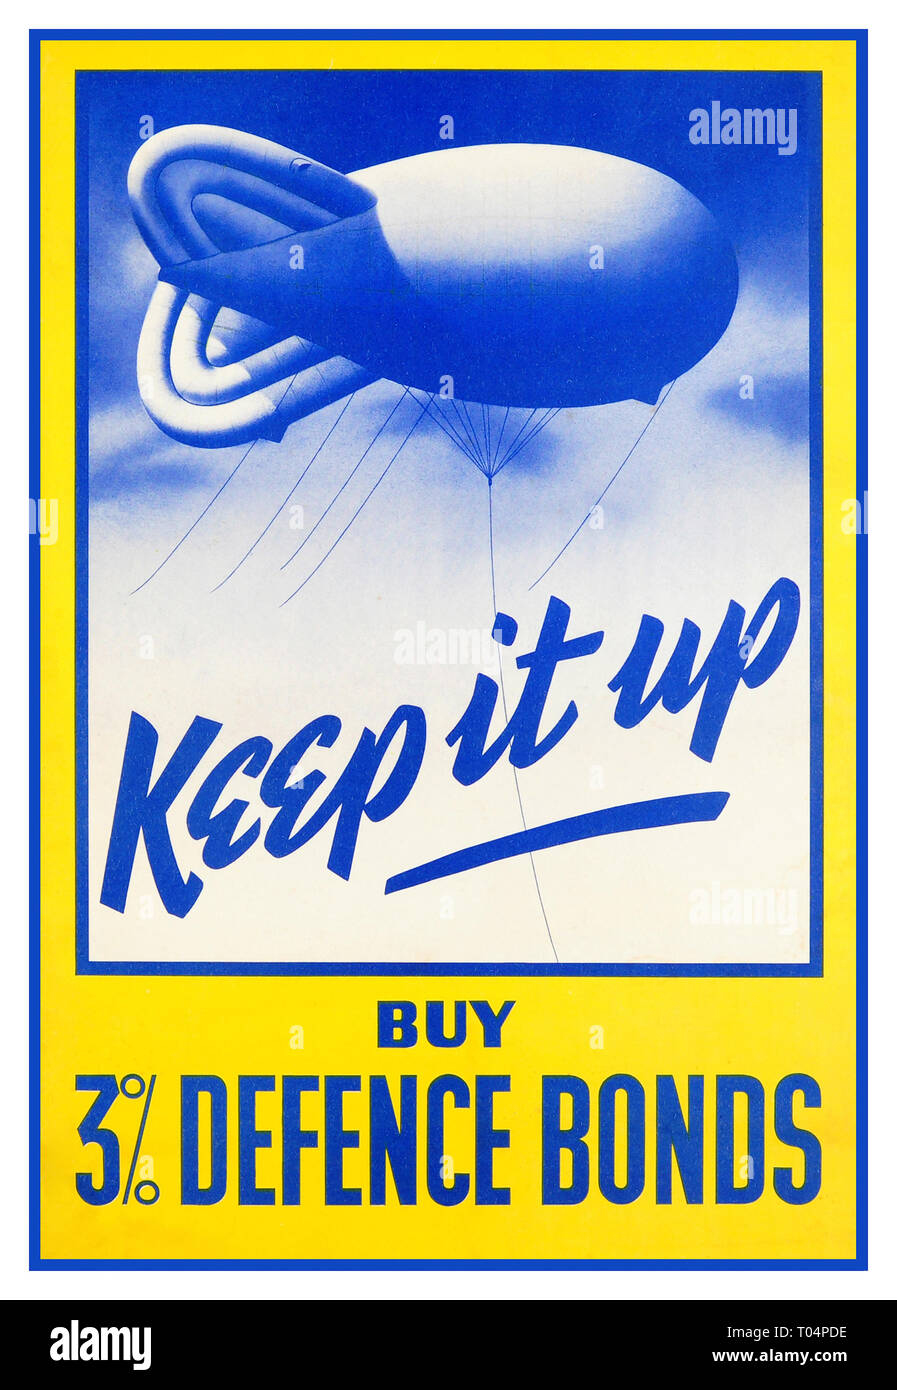 Vintage  World War II Propaganda poster: Keep it up – Buy 3% Defence Bonds. Colourful stylised image of a barrage balloon ('blimp') in the sky with stylised text in blue lettering, the rest of the text below in blue letters against a bright yellow background. Issued by the National Savings Committee, London; Scottish Savings Committee, Edinburgh; Ulster Savings Committee, Belfast. Printed for Her Majesty's Stationery Office by J. Weiner Ltd., London. Country:UK. Year:1940s. Stock Photo